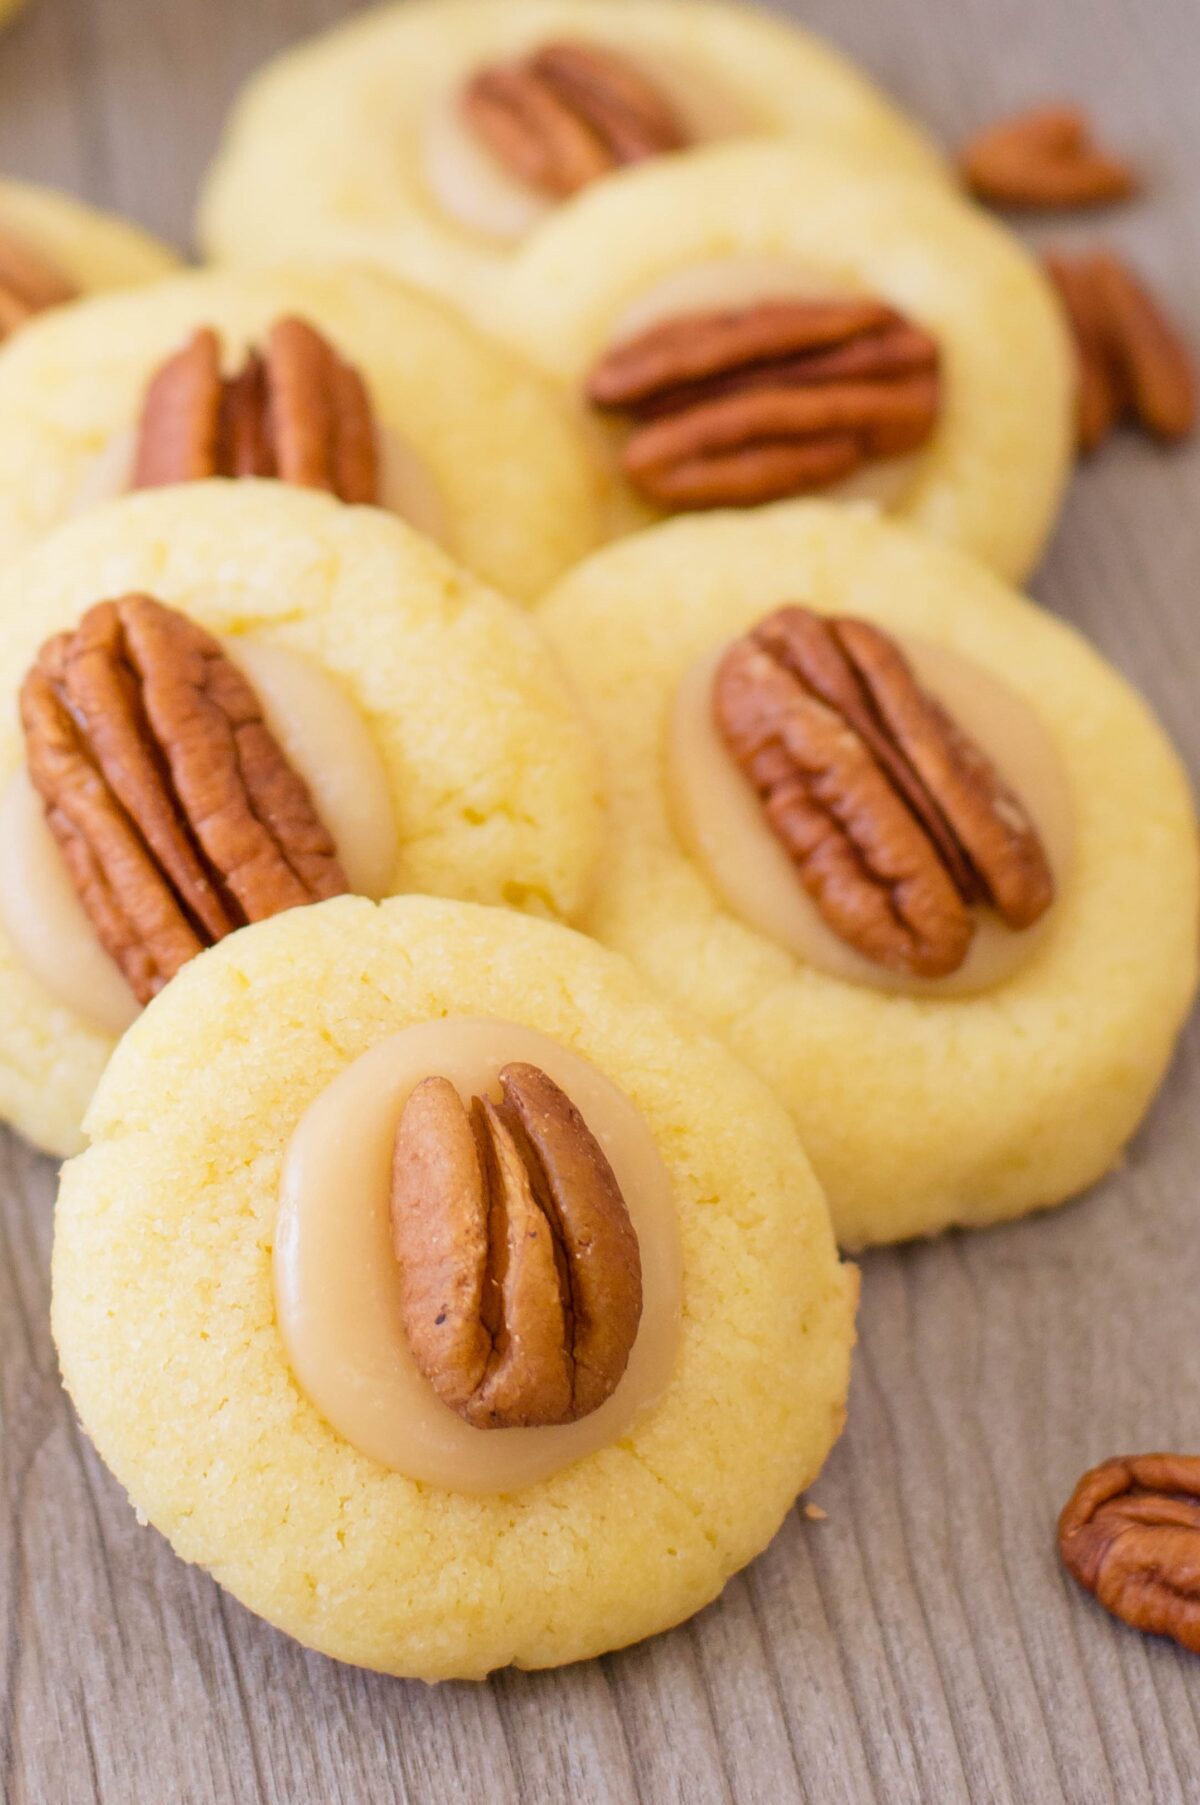 These pecan thumbprint cookies are easy to make and taste wonderful! They're perfect for holiday parties - or any day of the year, really.